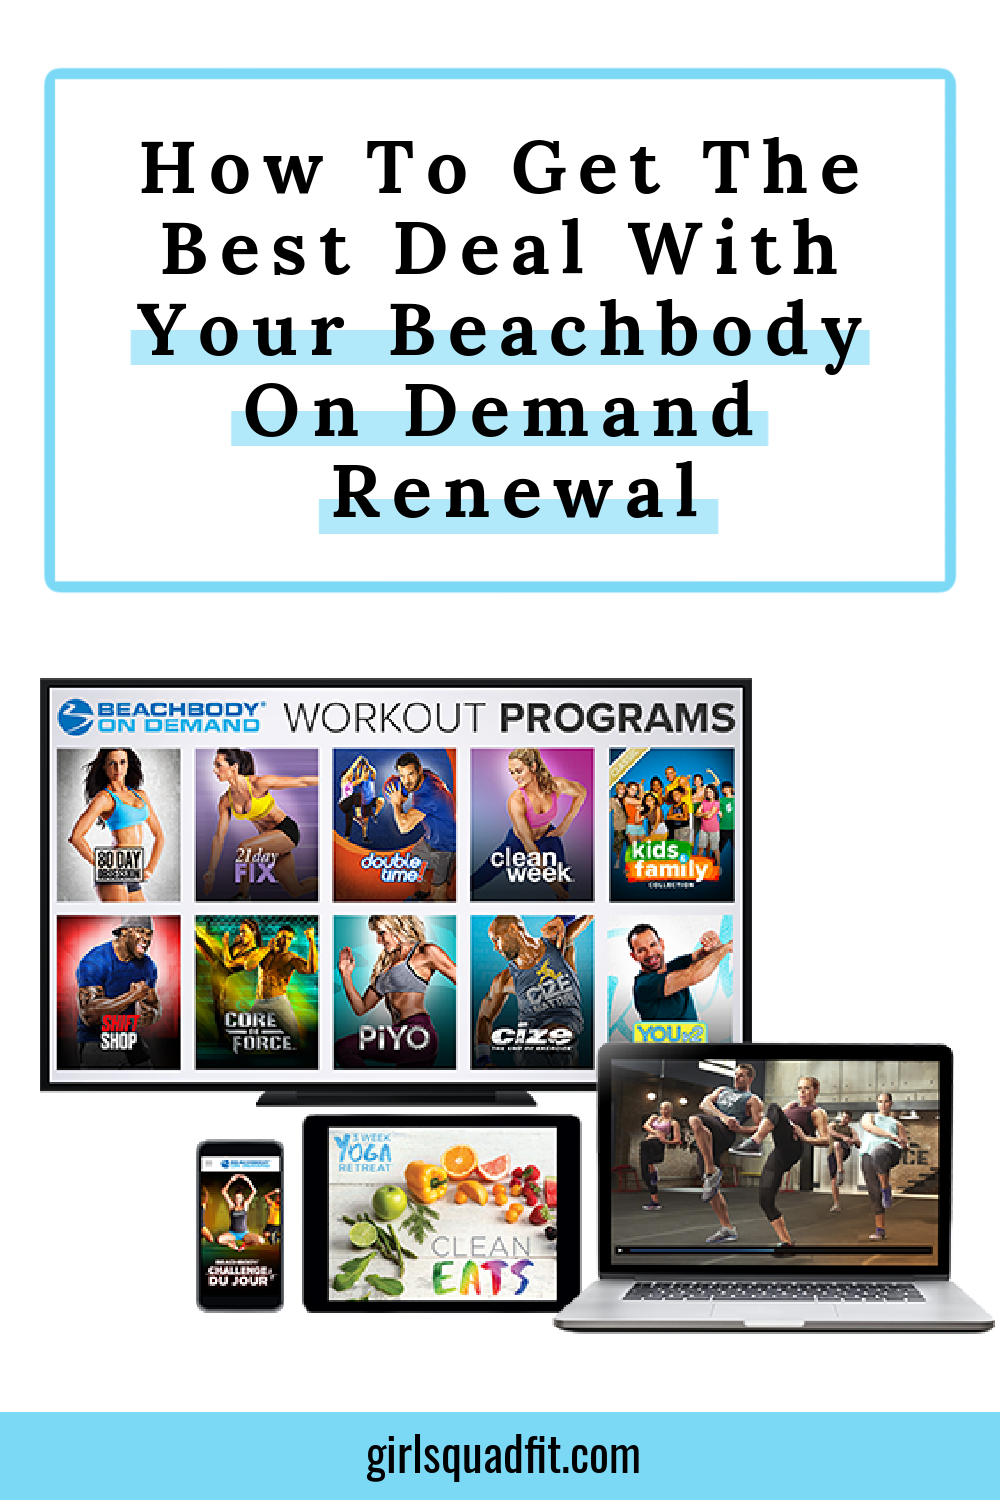 How To Get The Best Deal With Your Beachbody On Demand Renewal in 2021 — Girl Squad Fit